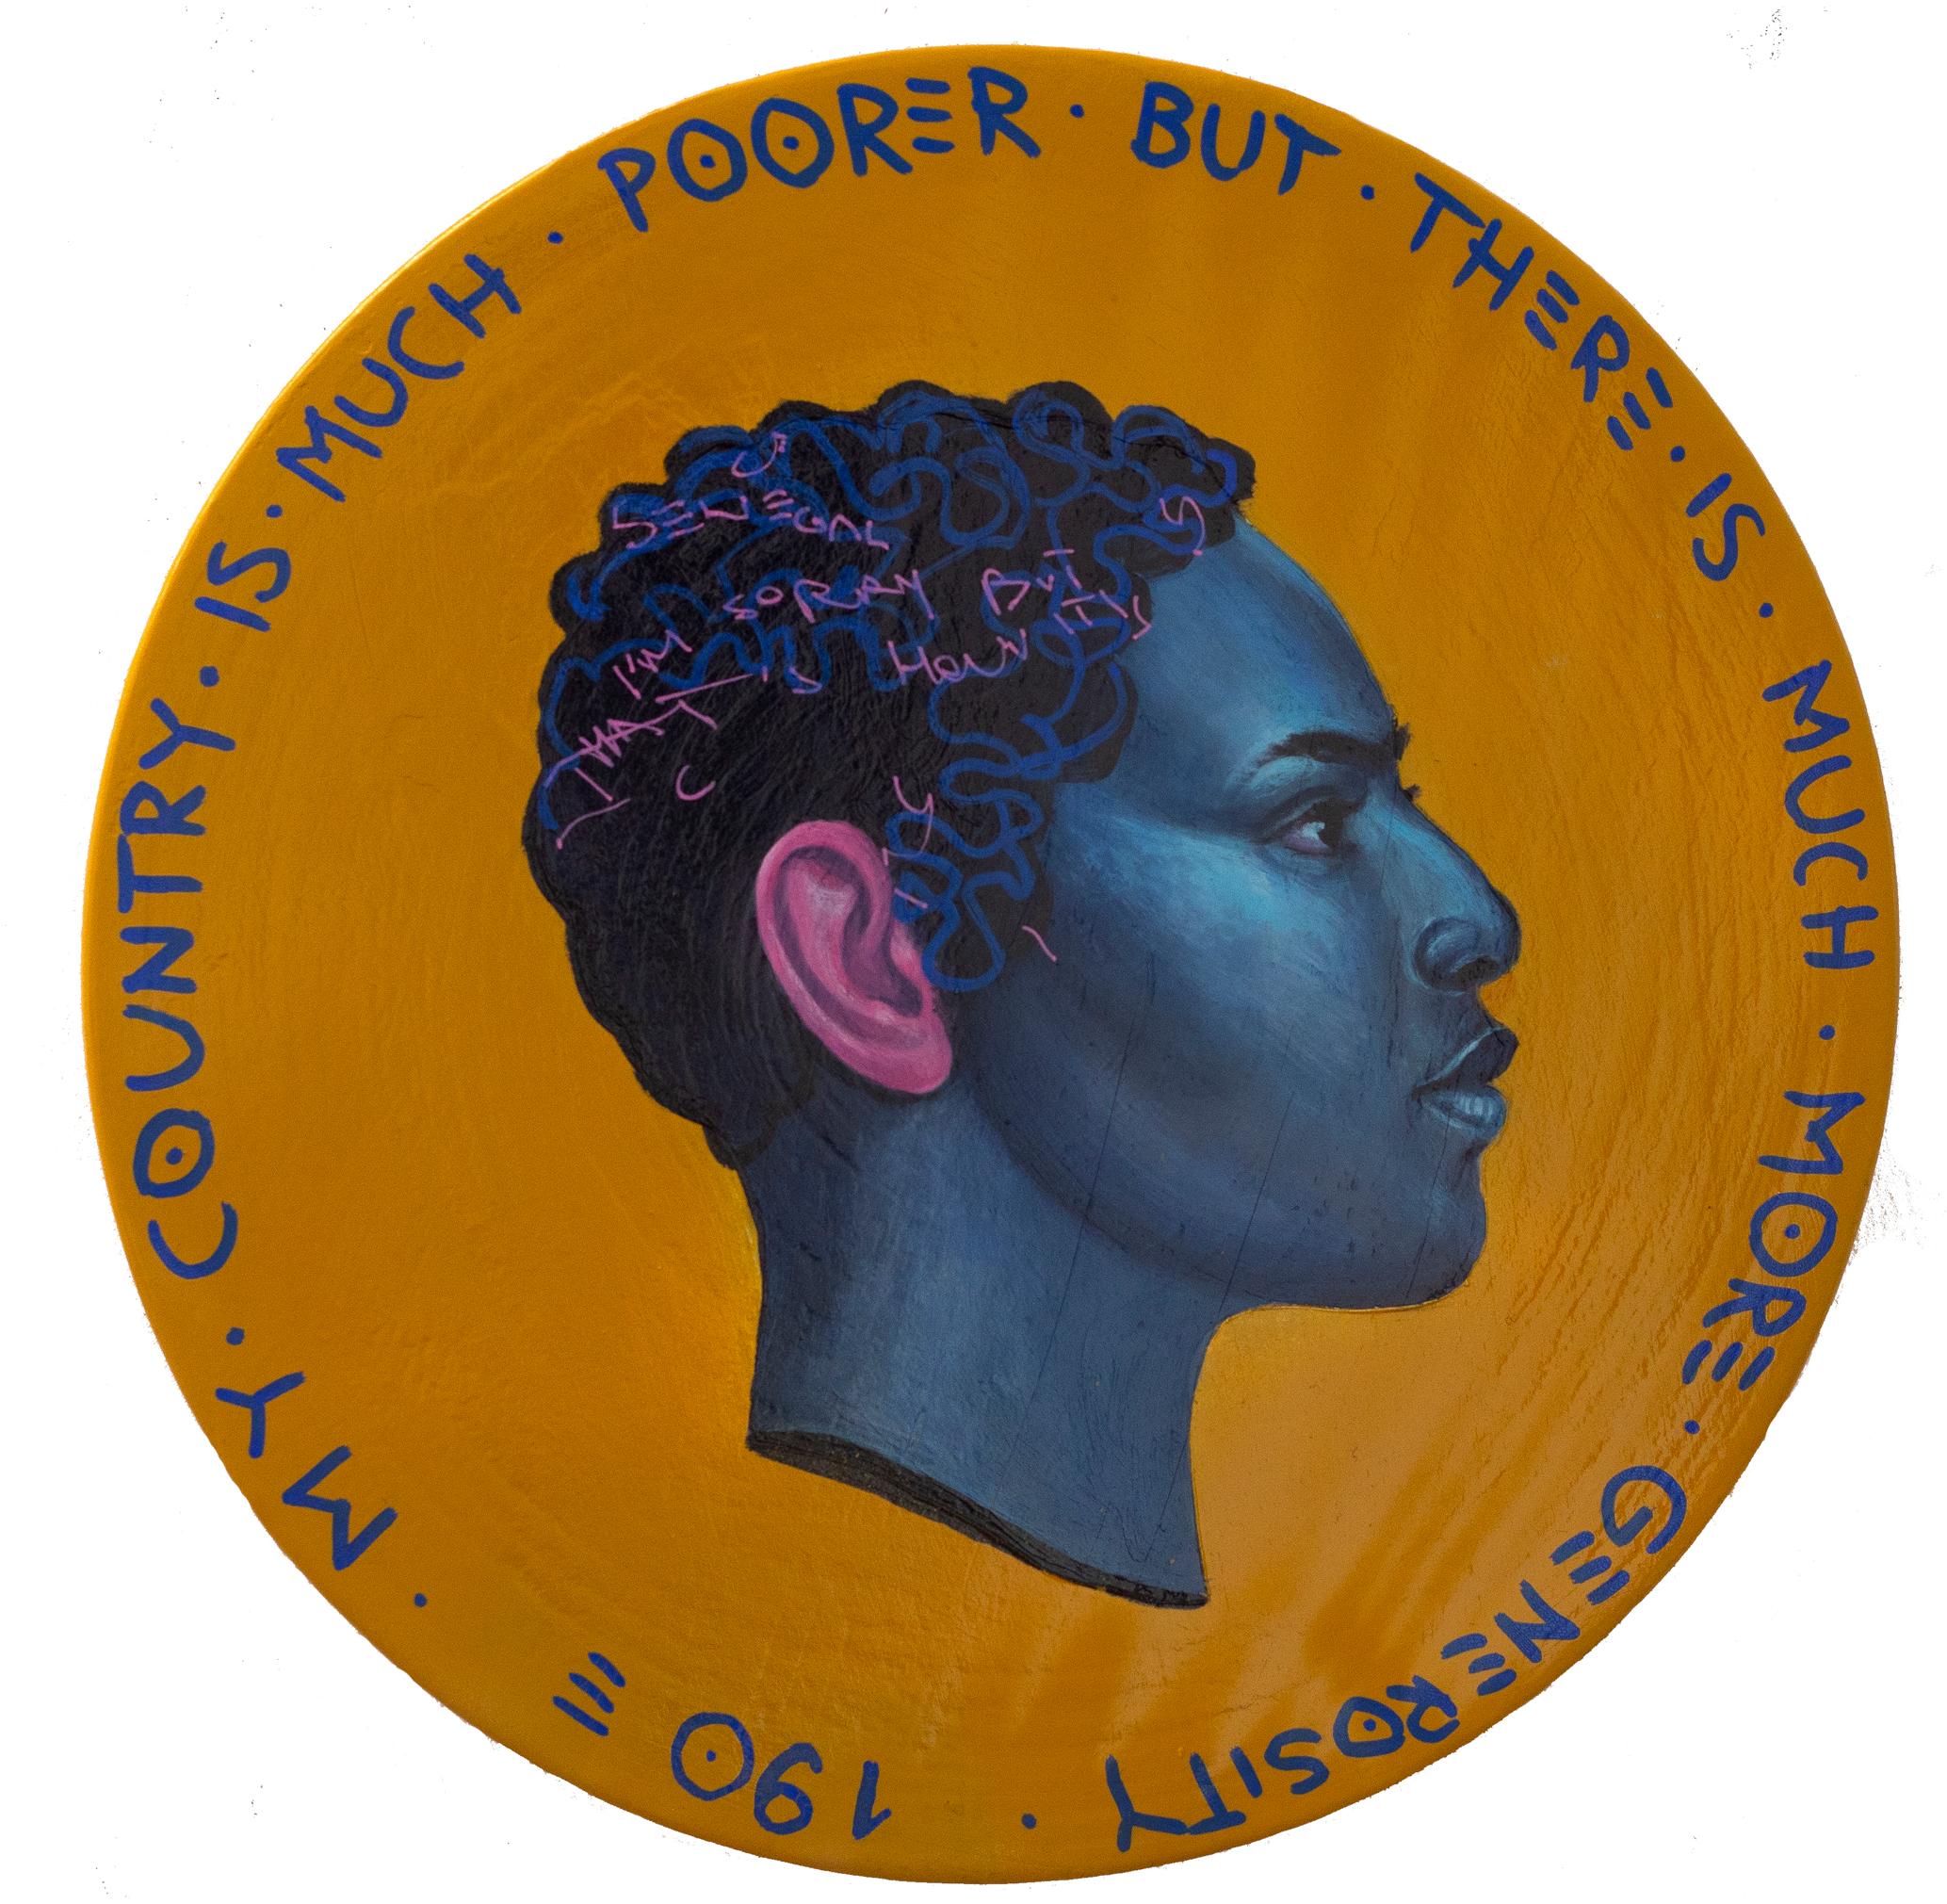 Vibrant Profile Portrait. Androgenous Face On a Wooden Coin.  "Currency #194" - Mixed Media Art by Natasha Lelenco